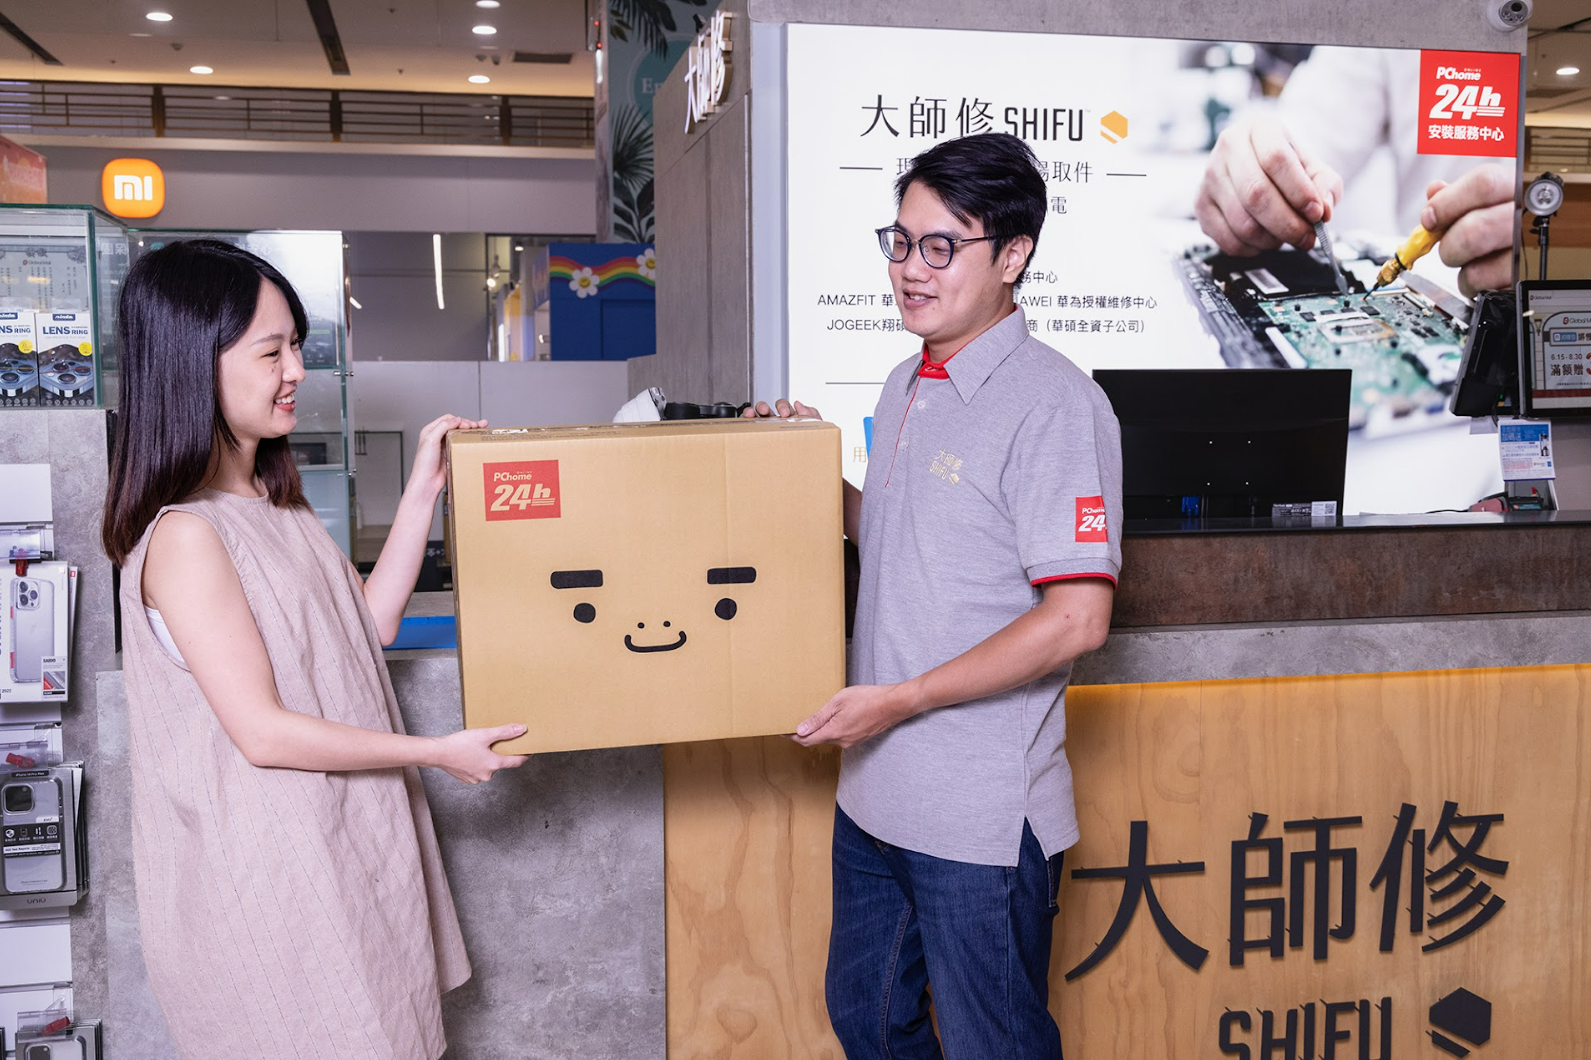 PChome Collaborates with SHIFU to Launch the PChome 24h Shopping Installation Service Center and Realizes Online-Merge-Offline Scenario!